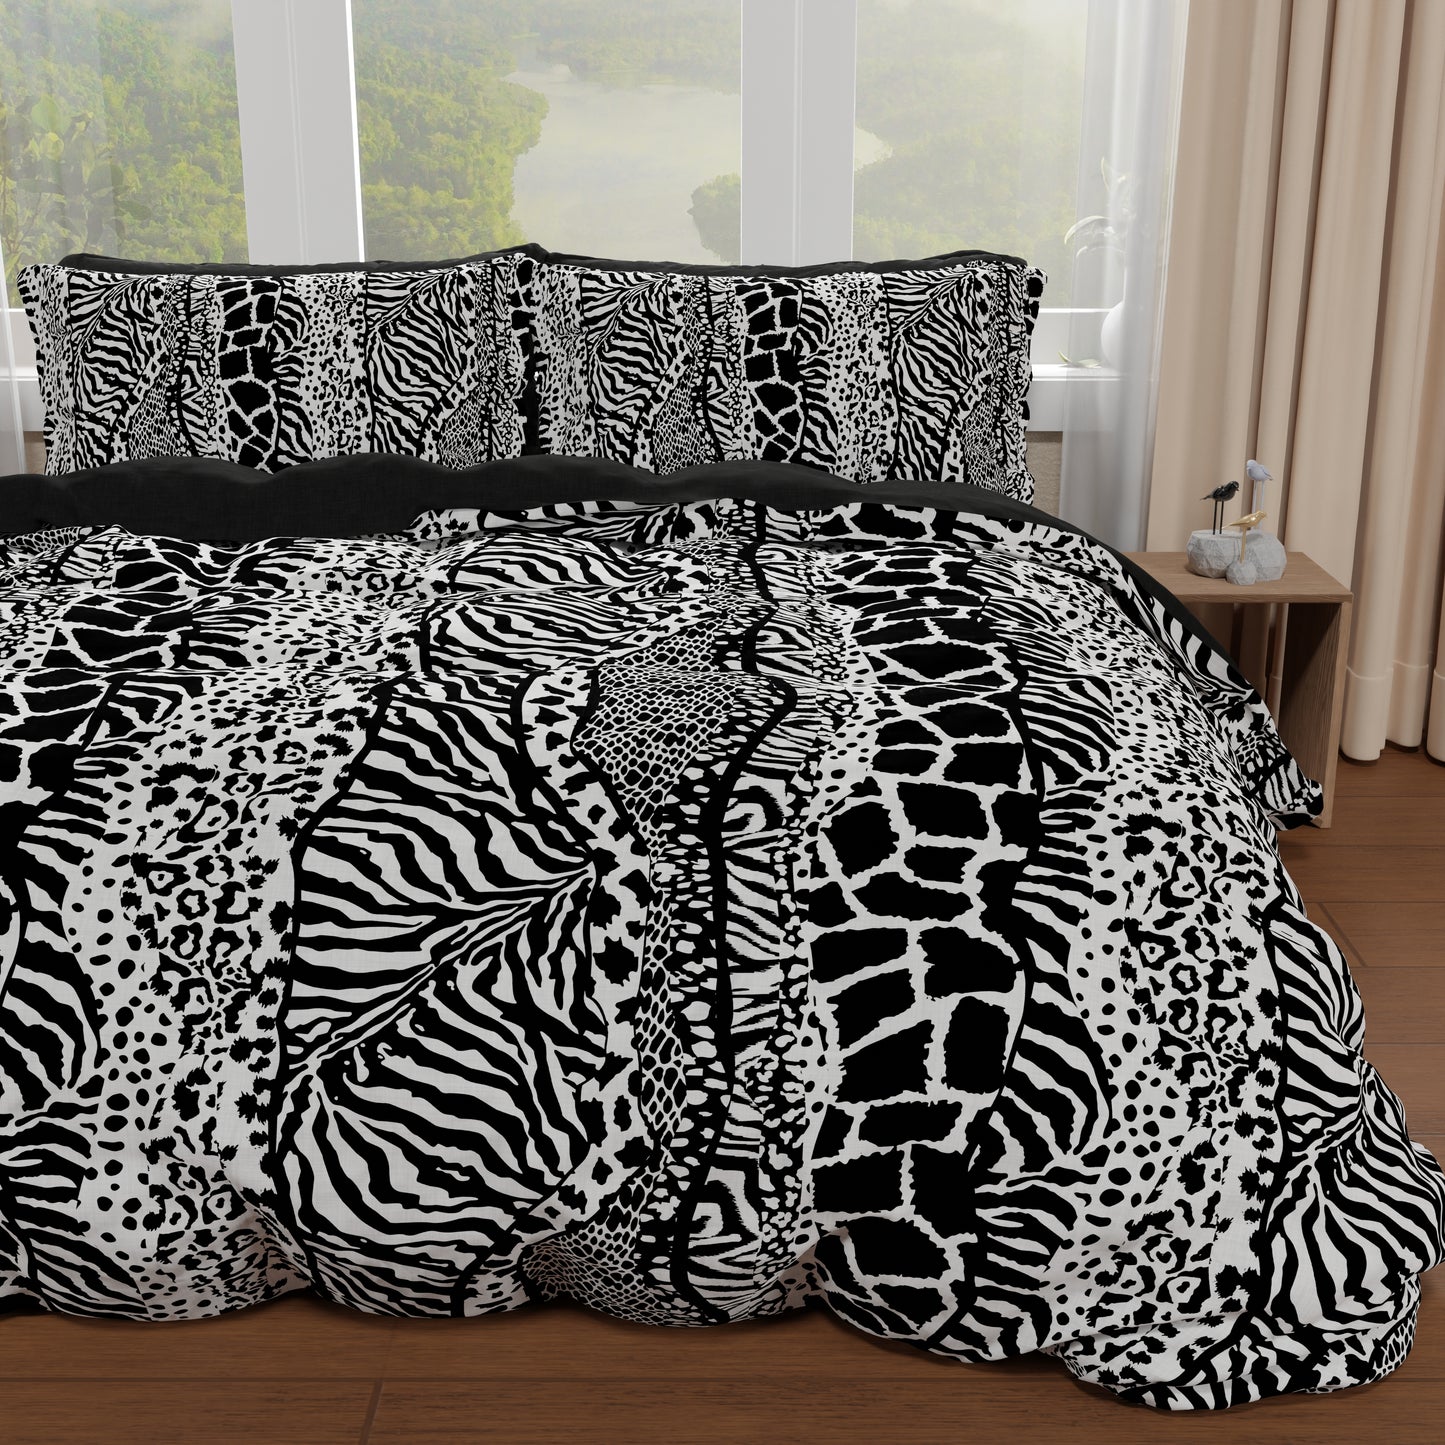 Duvet cover for double, single, one and a half square, animalier zebra